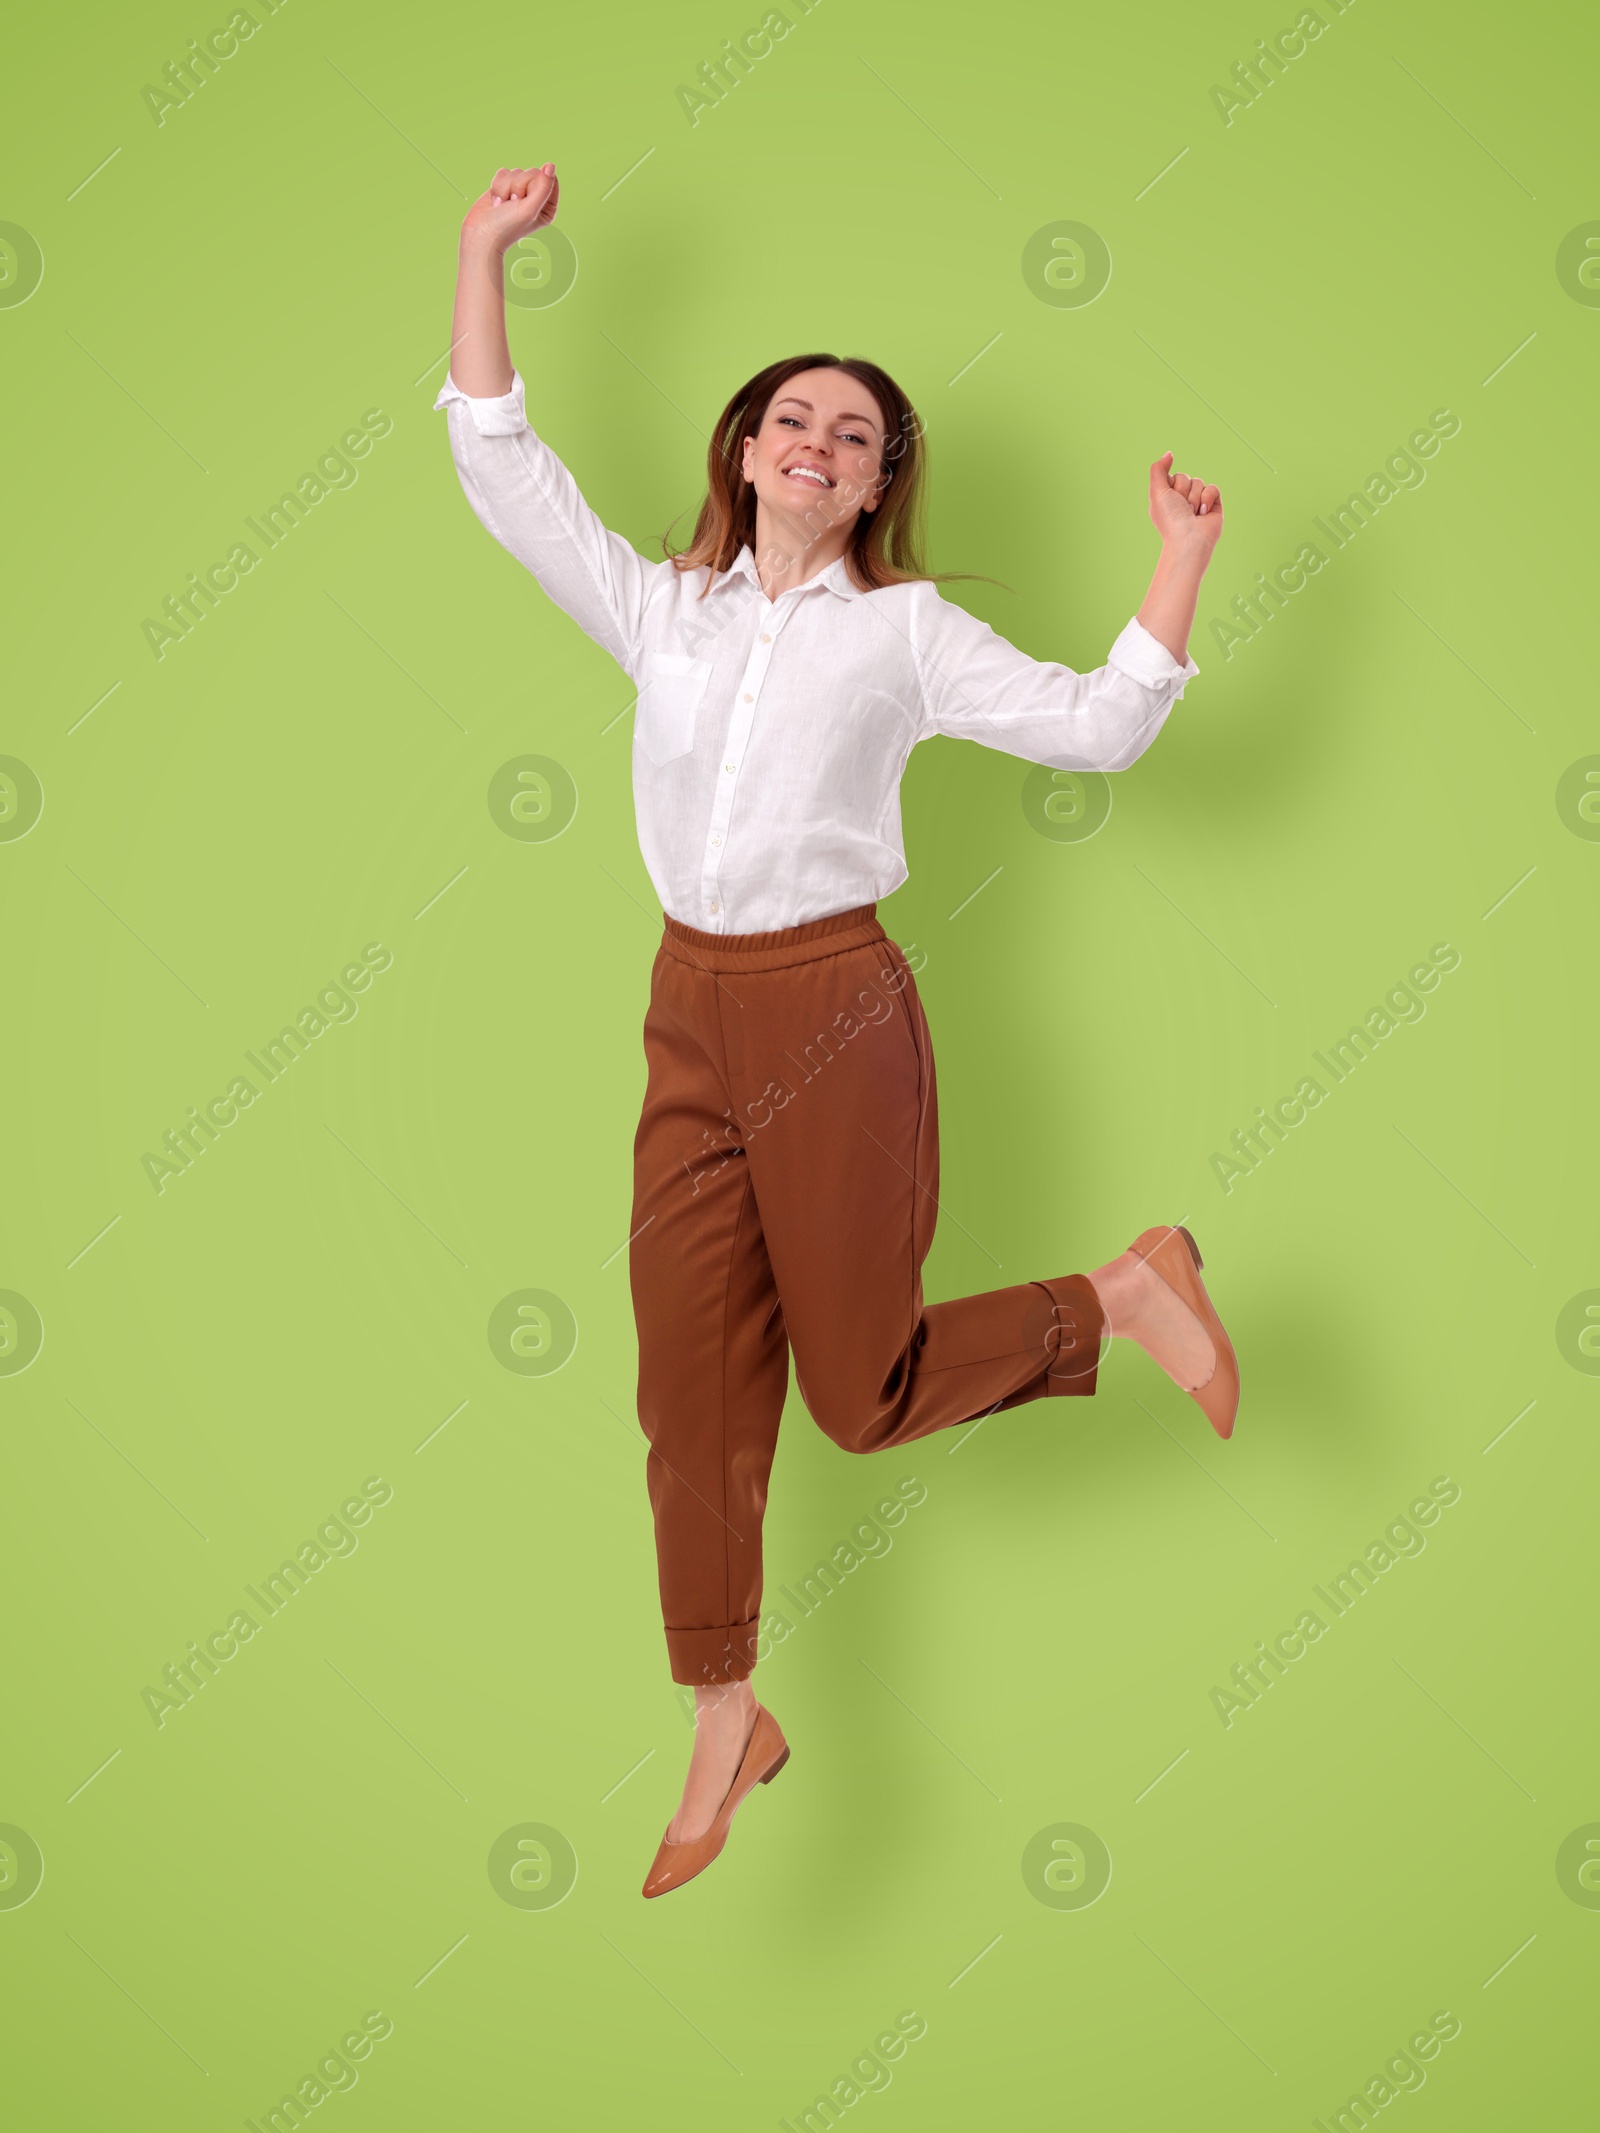 Image of Positive young woman jumping on light green background